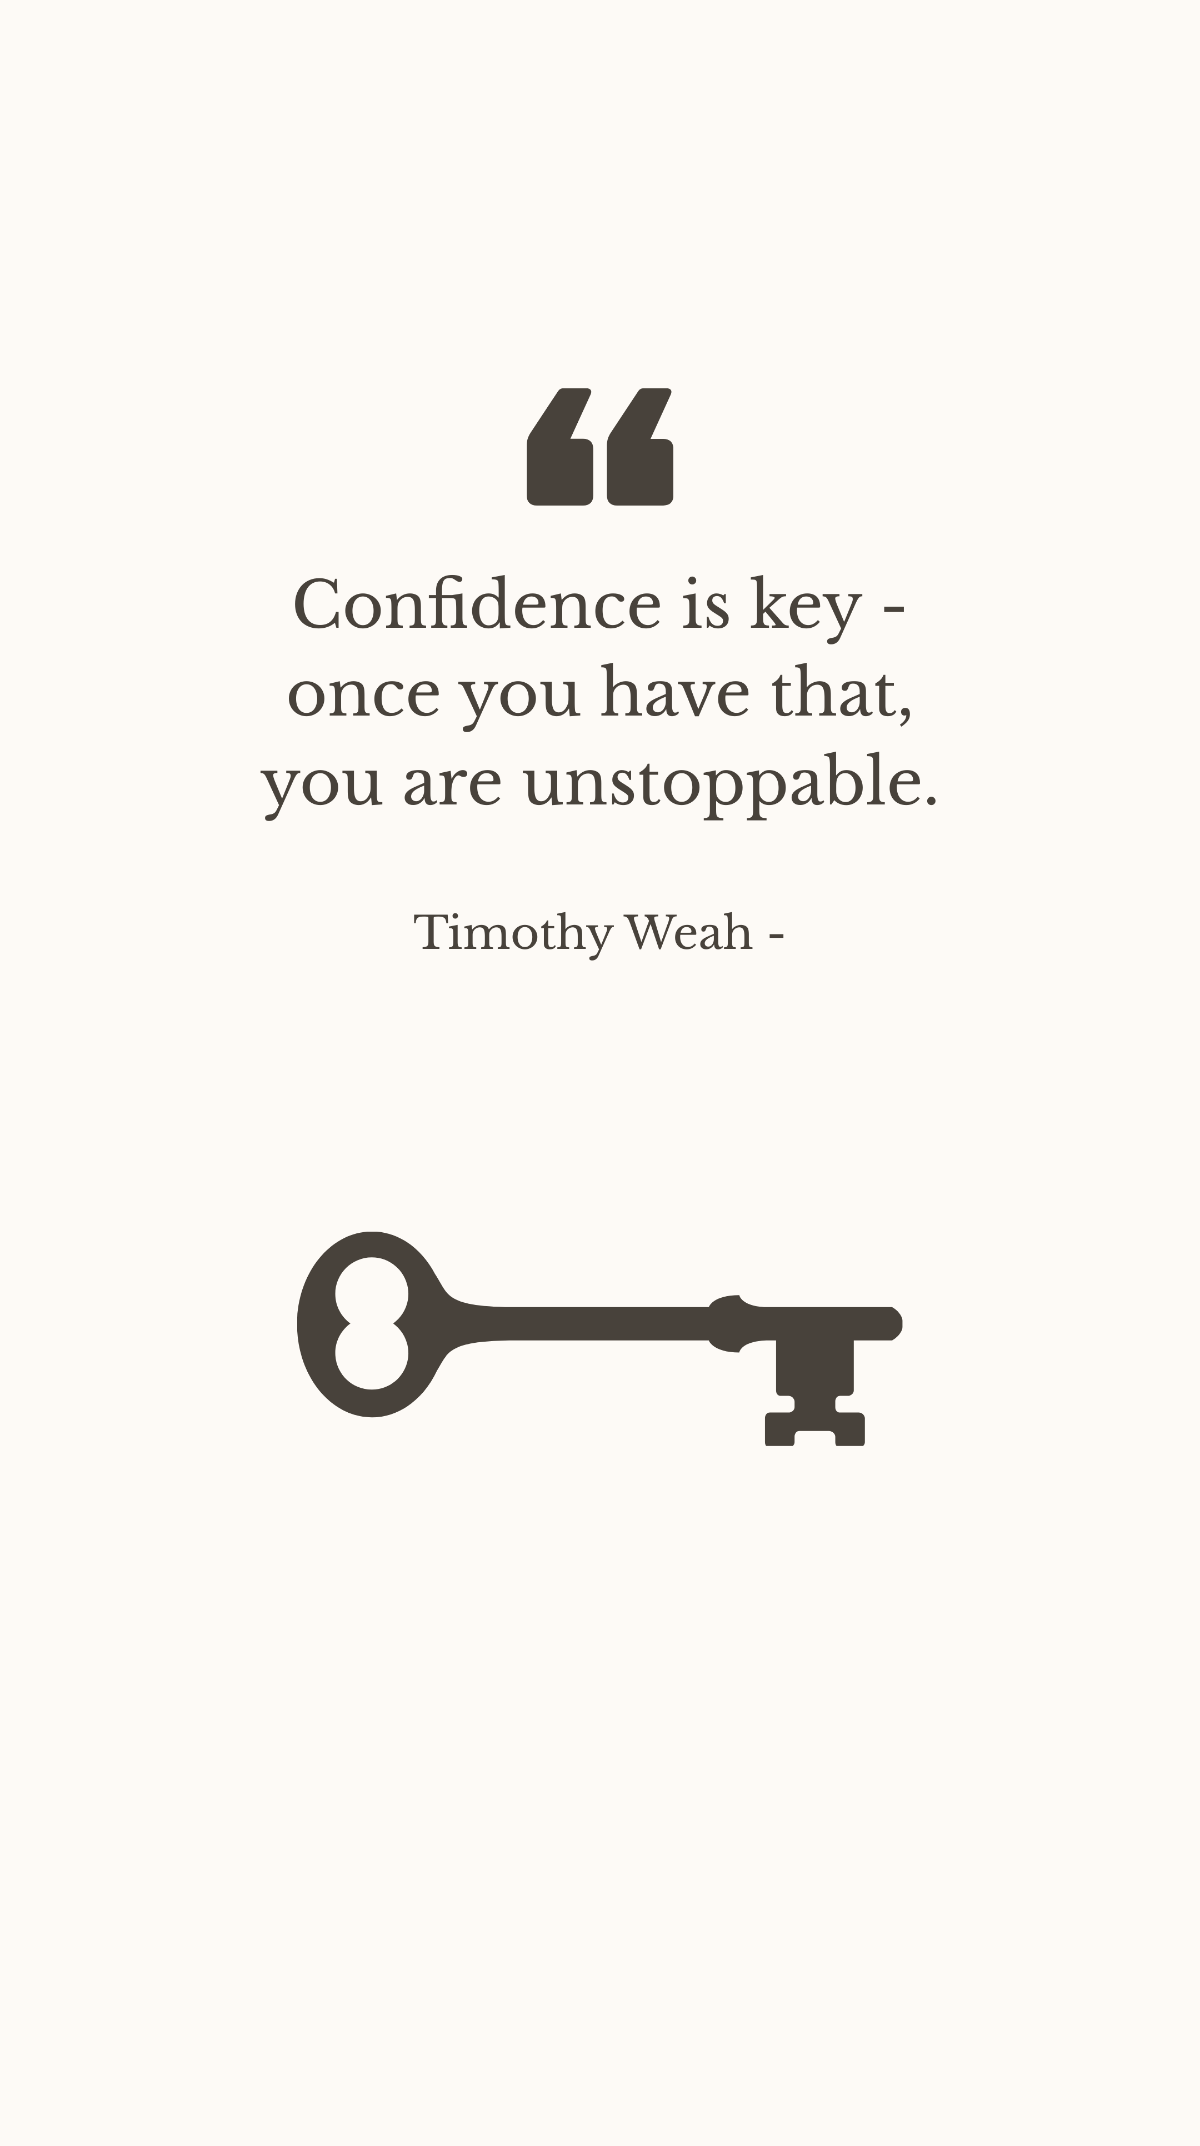 Free Timothy Weah - Confidence is key - once you have that, you are unstoppable. Template